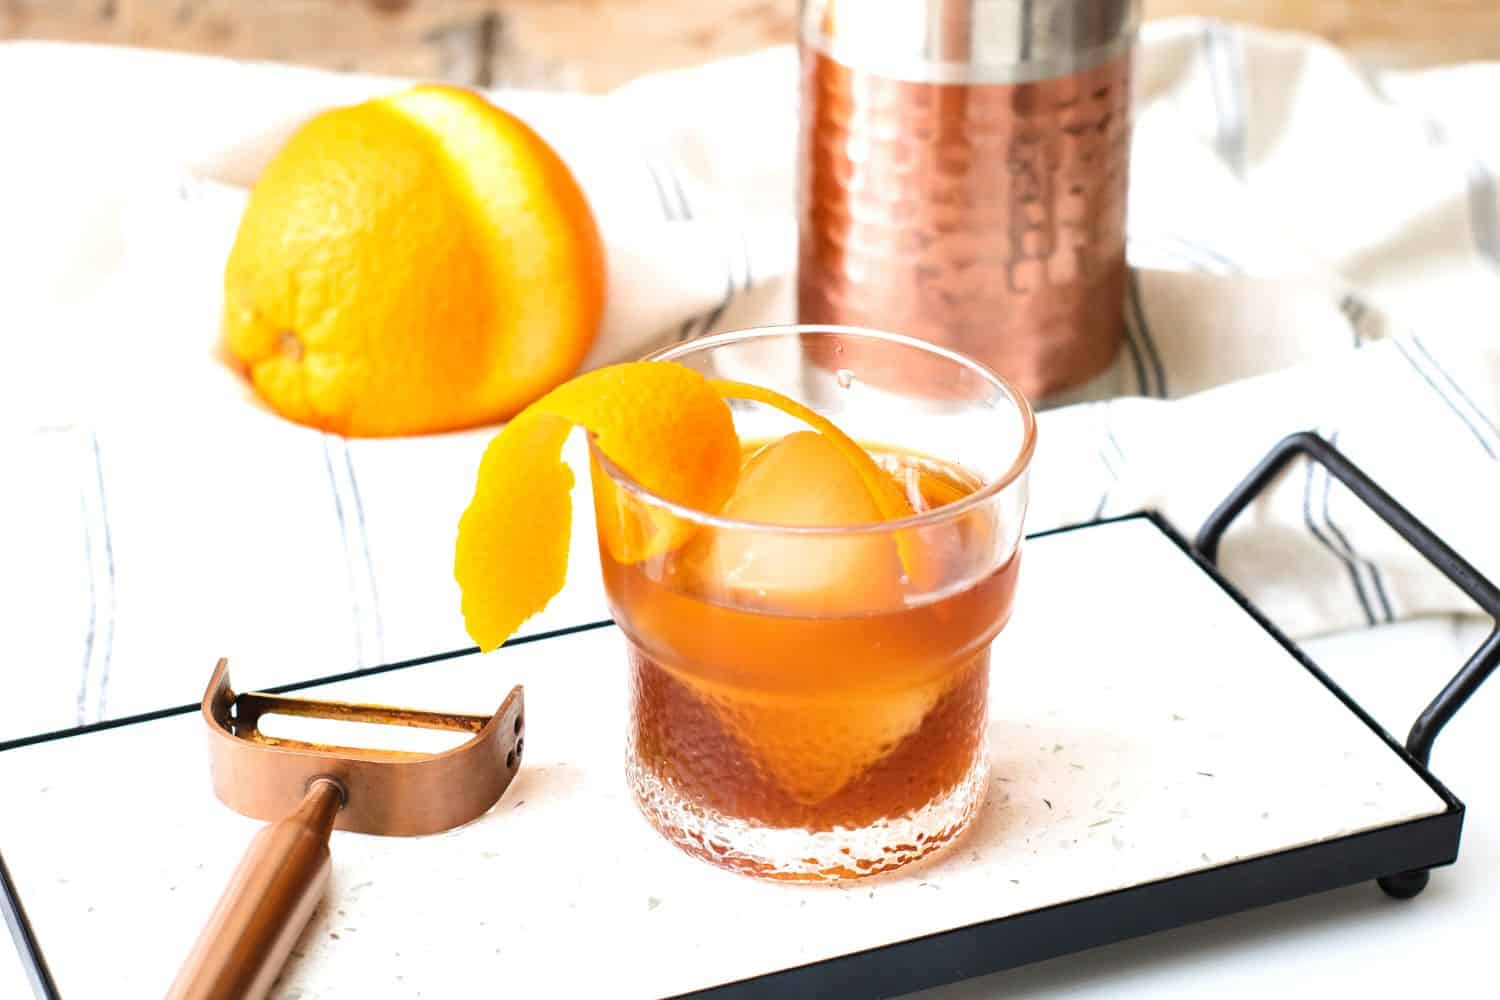 Keto Old Fashioned Cocktail